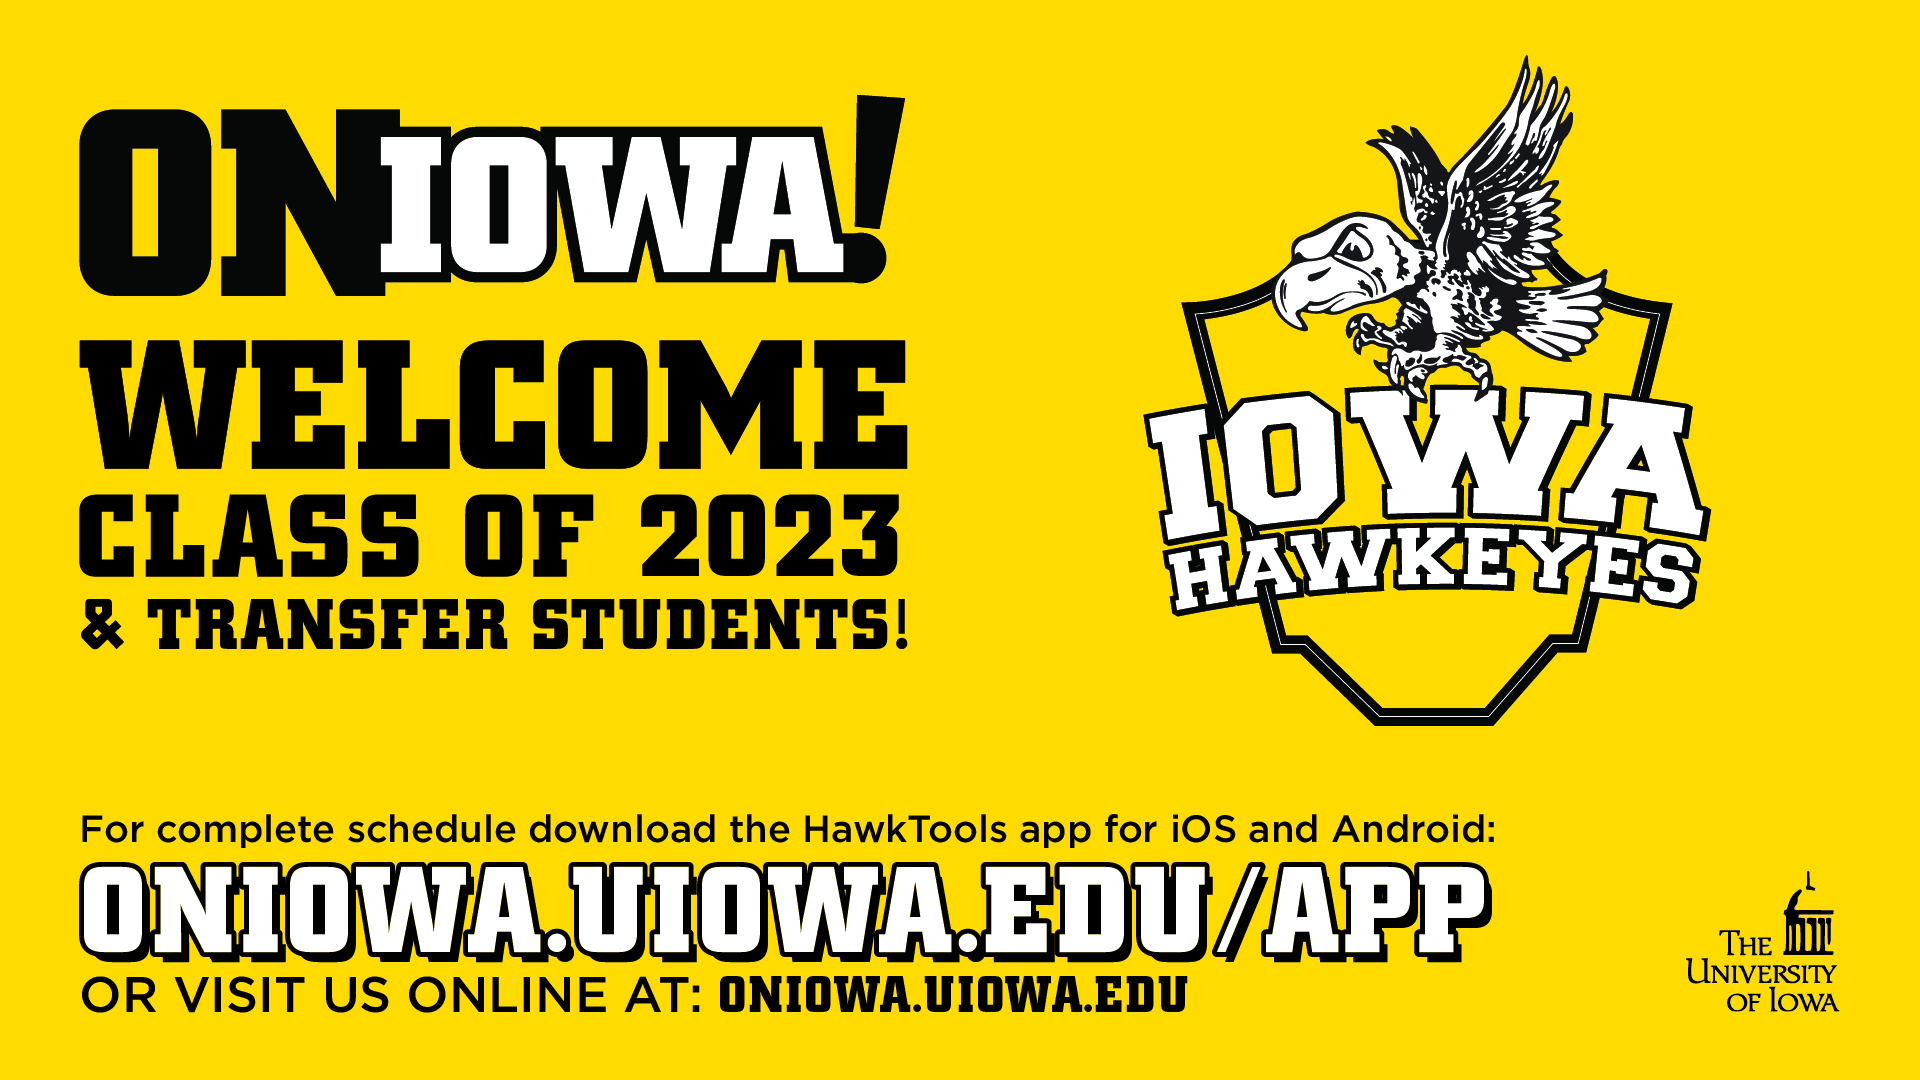 OnIowa! Welcome Class of 2023 & Transfer Students! For complete schedule, download the HawkTools app for iOS and Android: oniowa.uiowa.edu/app or visit us online at oniowa.uiowa.edu